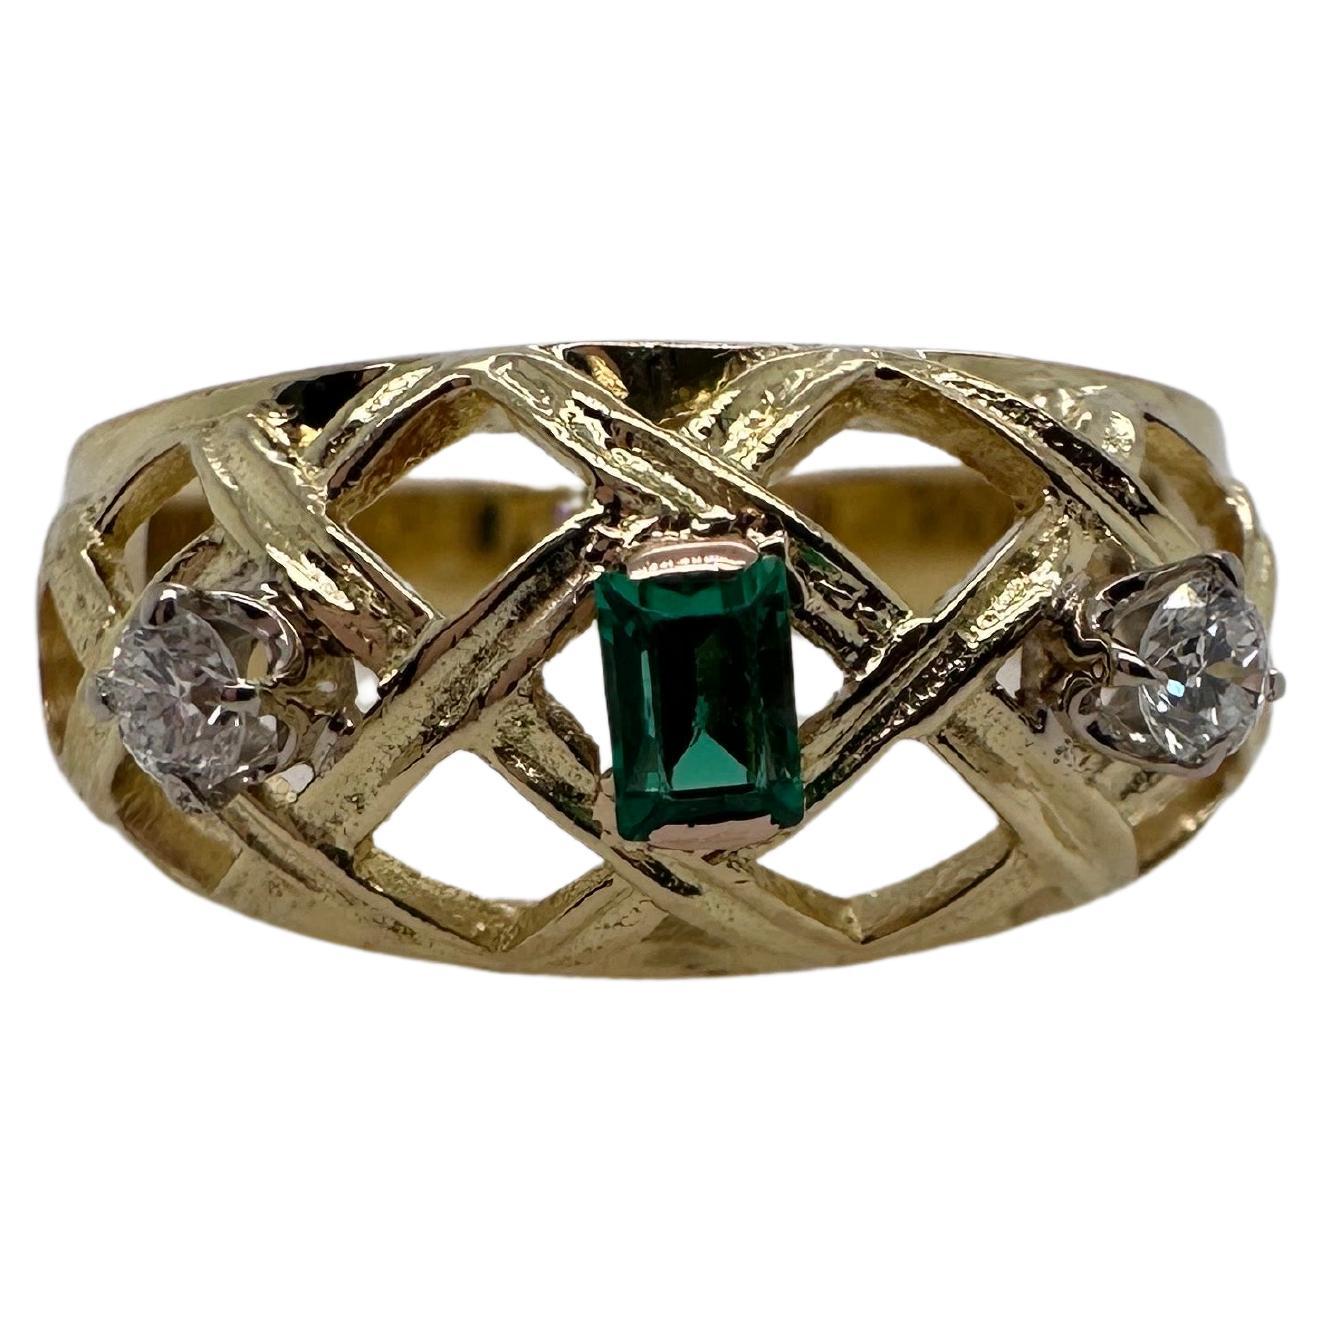 Stunning cocktail diamond ring with emerald center. The emerald is from Colombia, bluish green in color, diamonds are VS clarity and F color originating from Canada. The ring is made in 18KT gold and will take 8 days before it ships